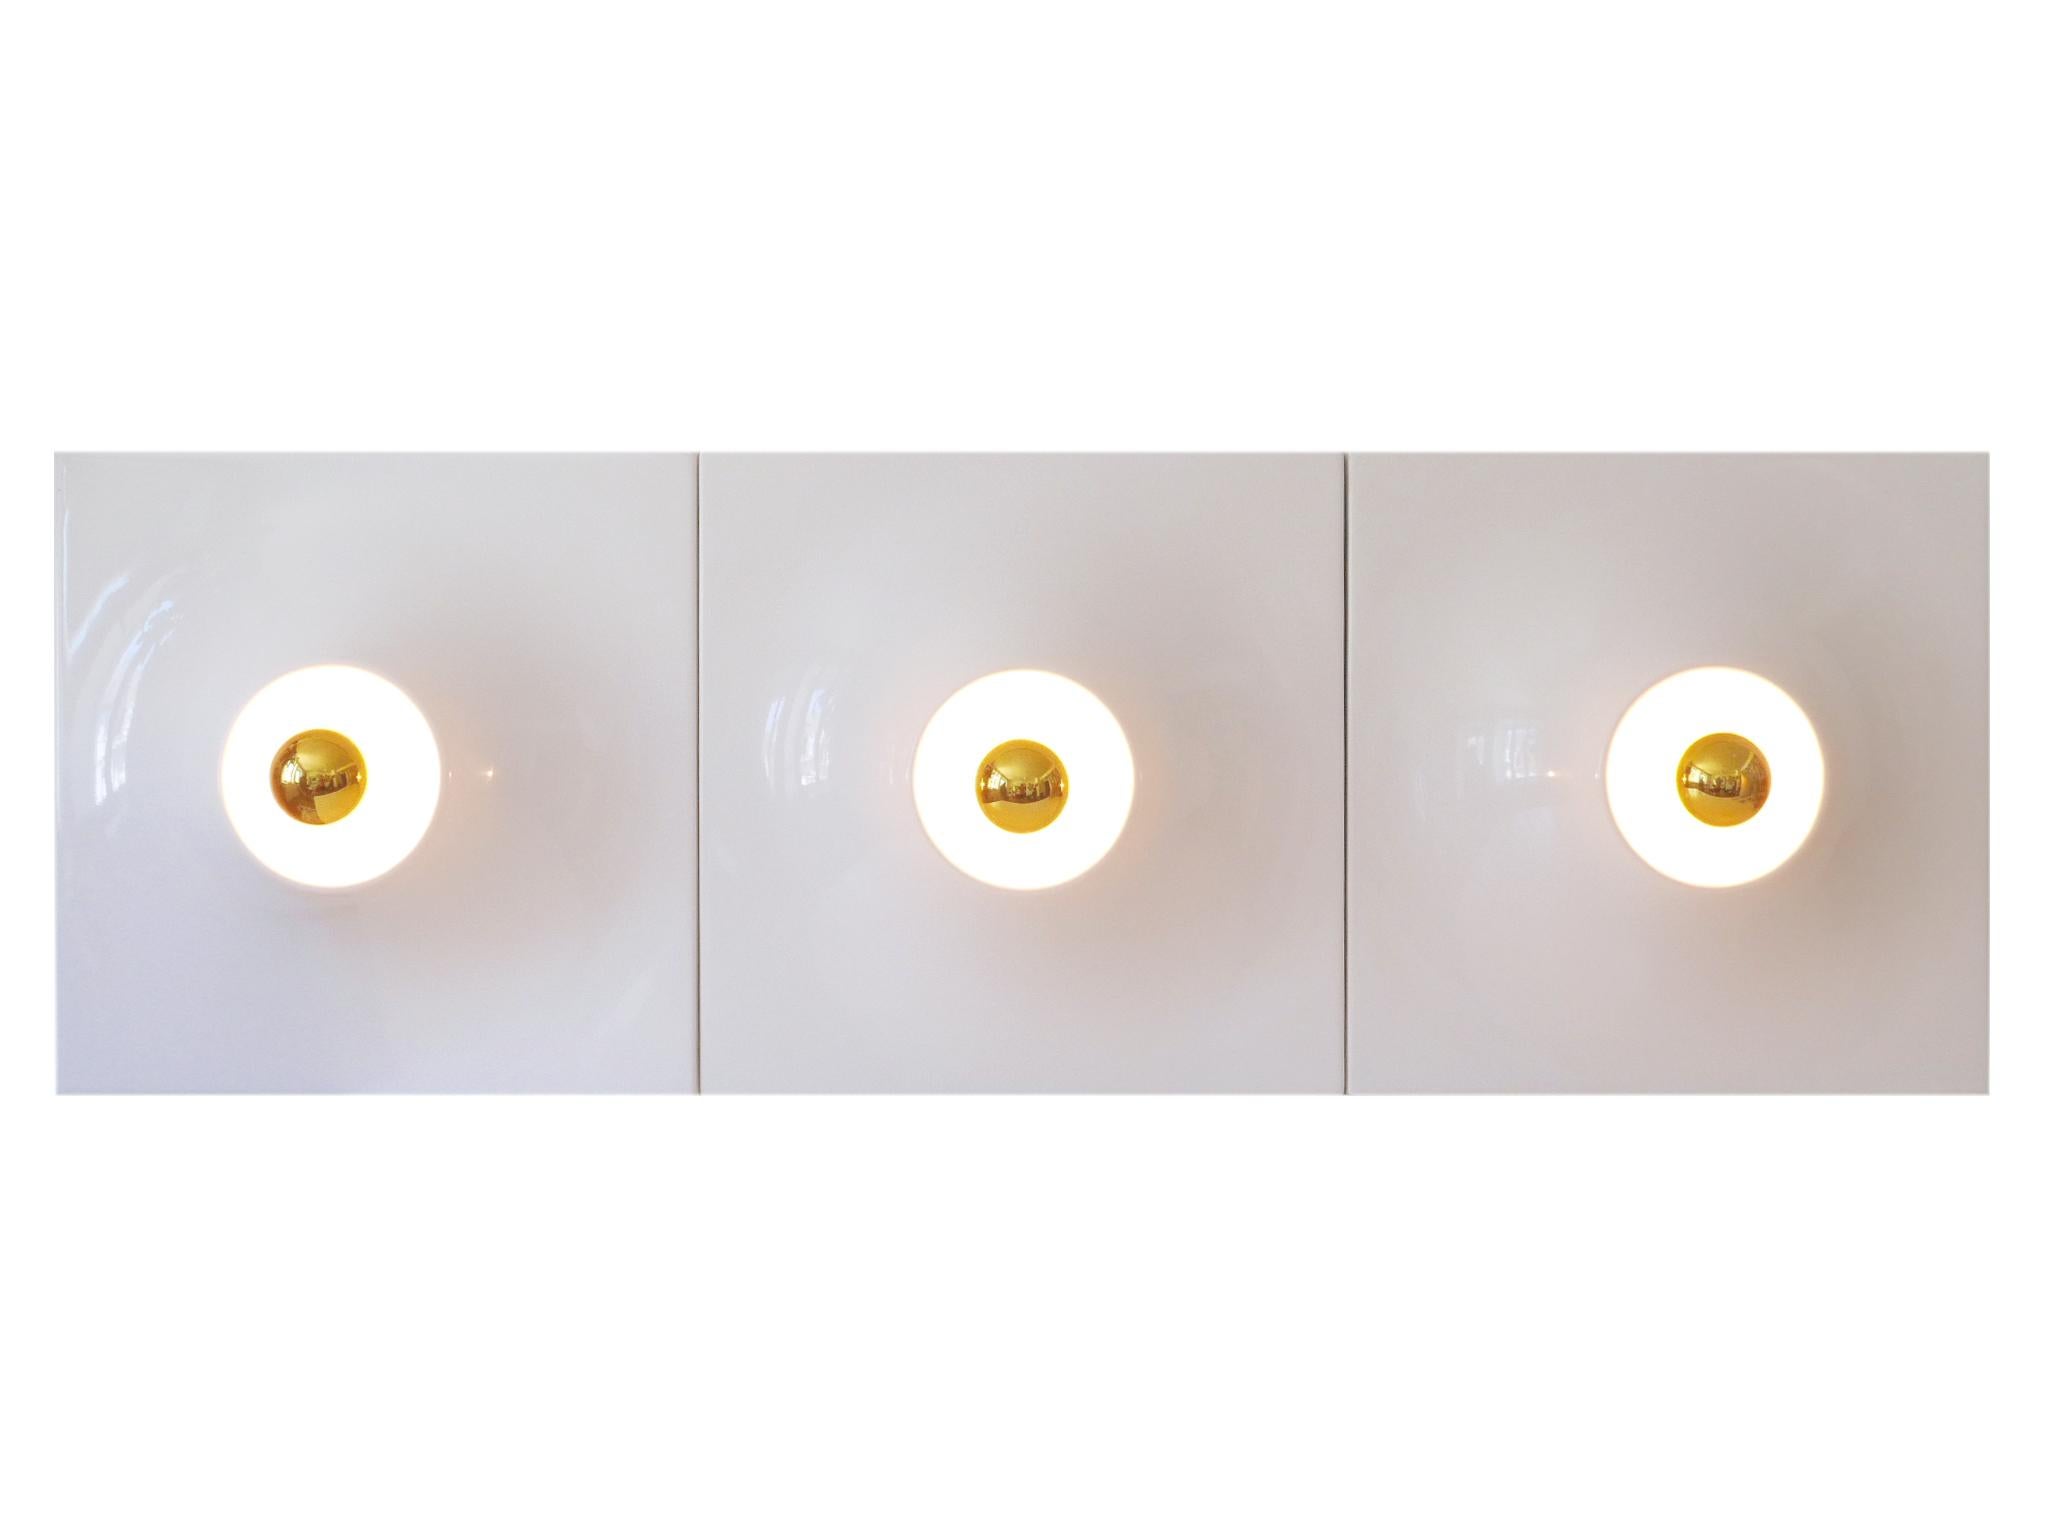 Set of three large and highly decorative Mid-Century Modern fiberglass wall panel lights or sconces. Designed & manufactured in Germany, 1970s.

Executed in white plastic coated fiberglass, each fixture is executed with 1 x E27 / E26 Edison screw